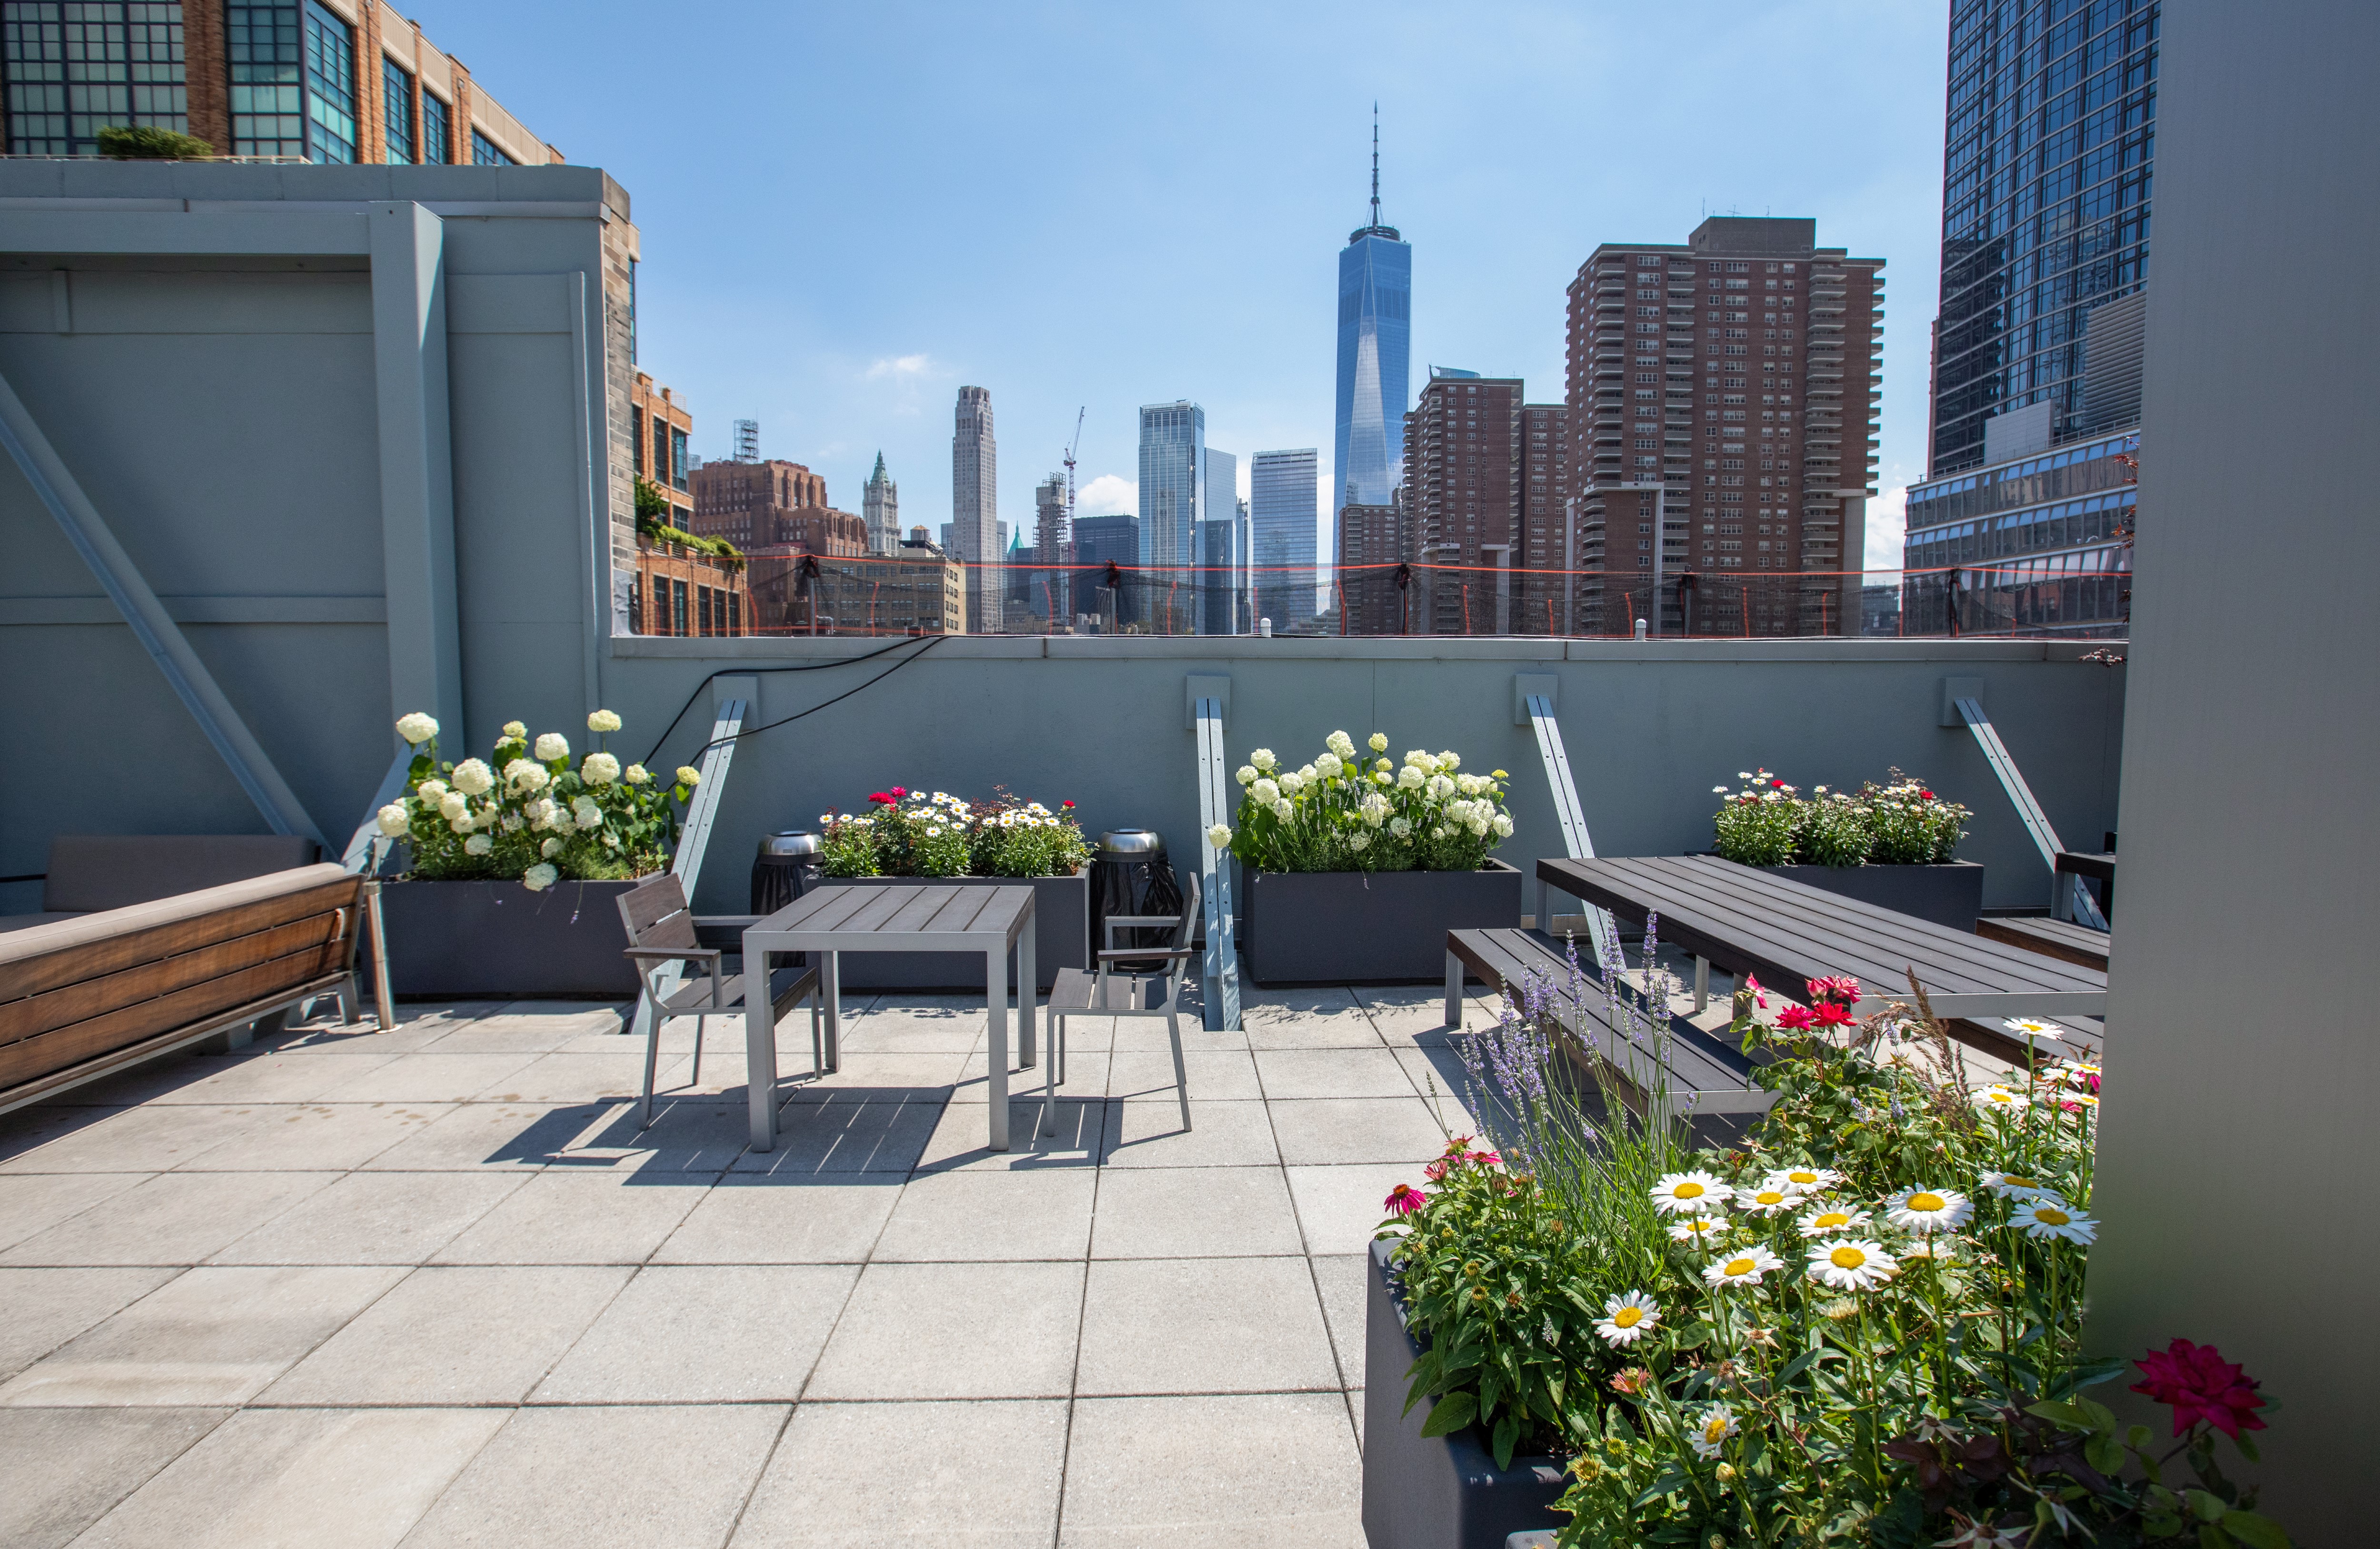 The rooftop becomes a canvas of tranquility, where a symphony of plants harmonizes with the bustling city below.